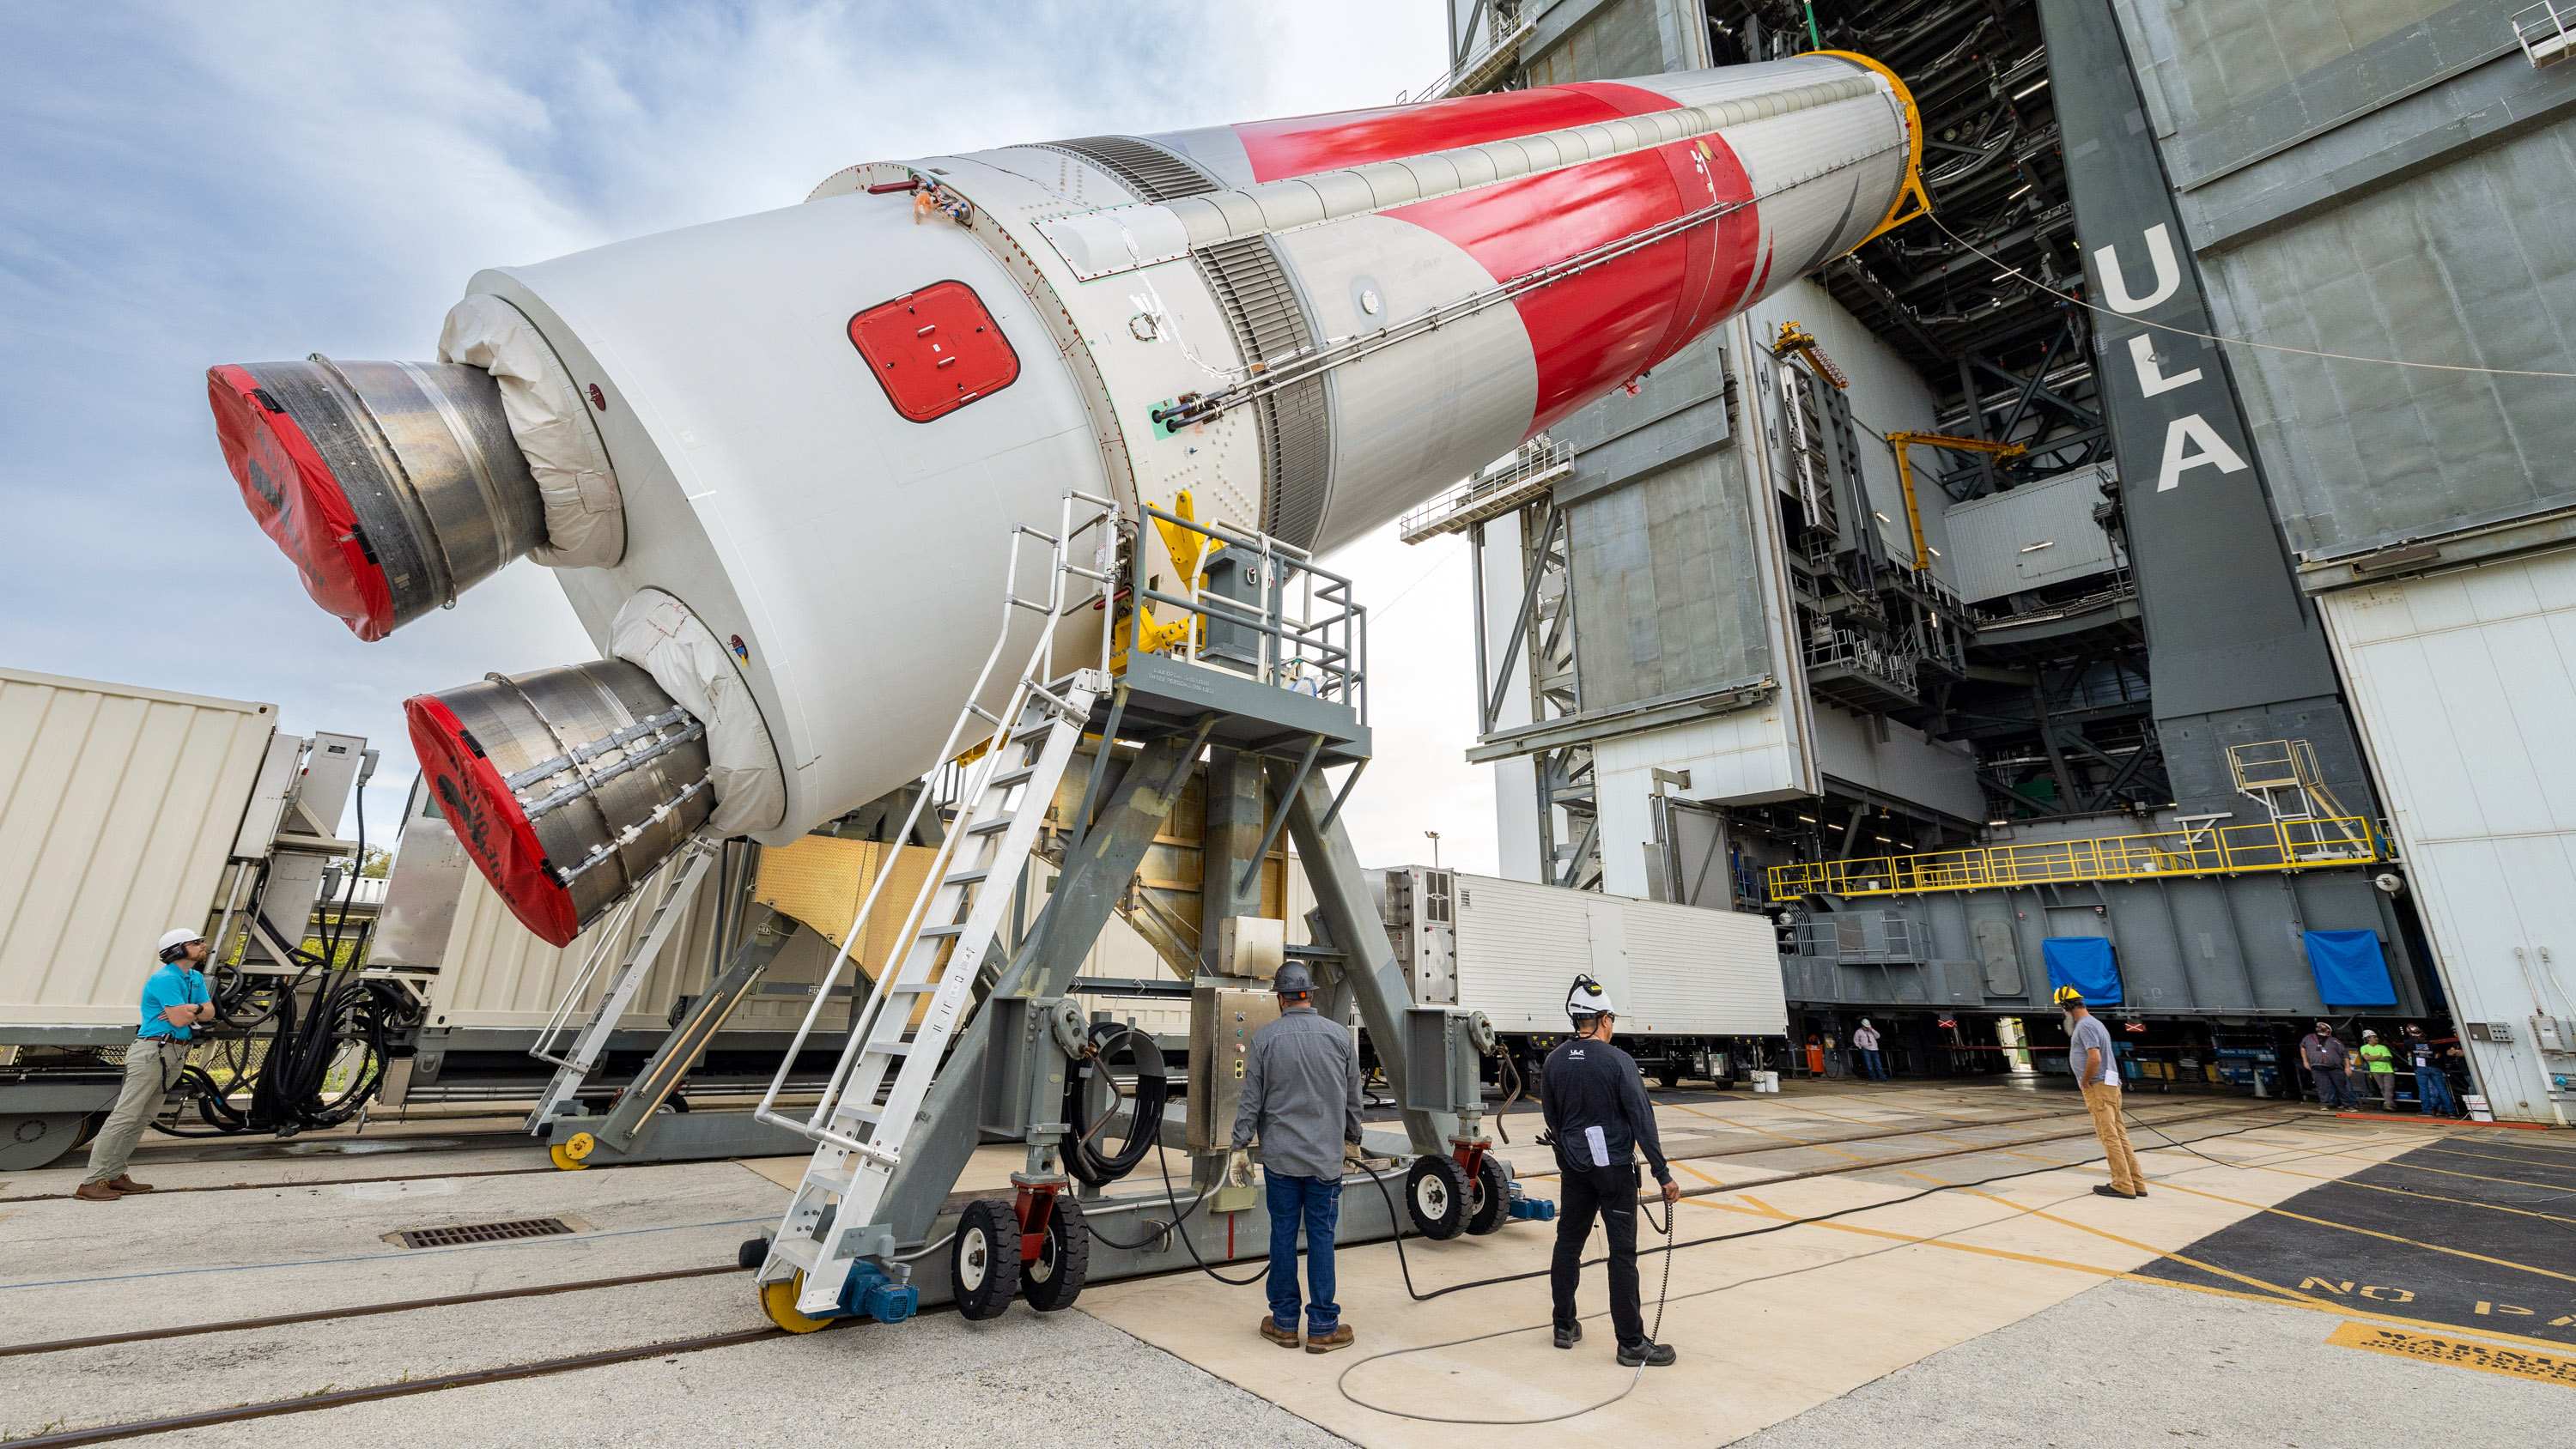 United Launch Alliance (ULA) hoists its Vulcan Cert-1 booster into the Vertical Integration Facility (VIF) at Cape Canaveral